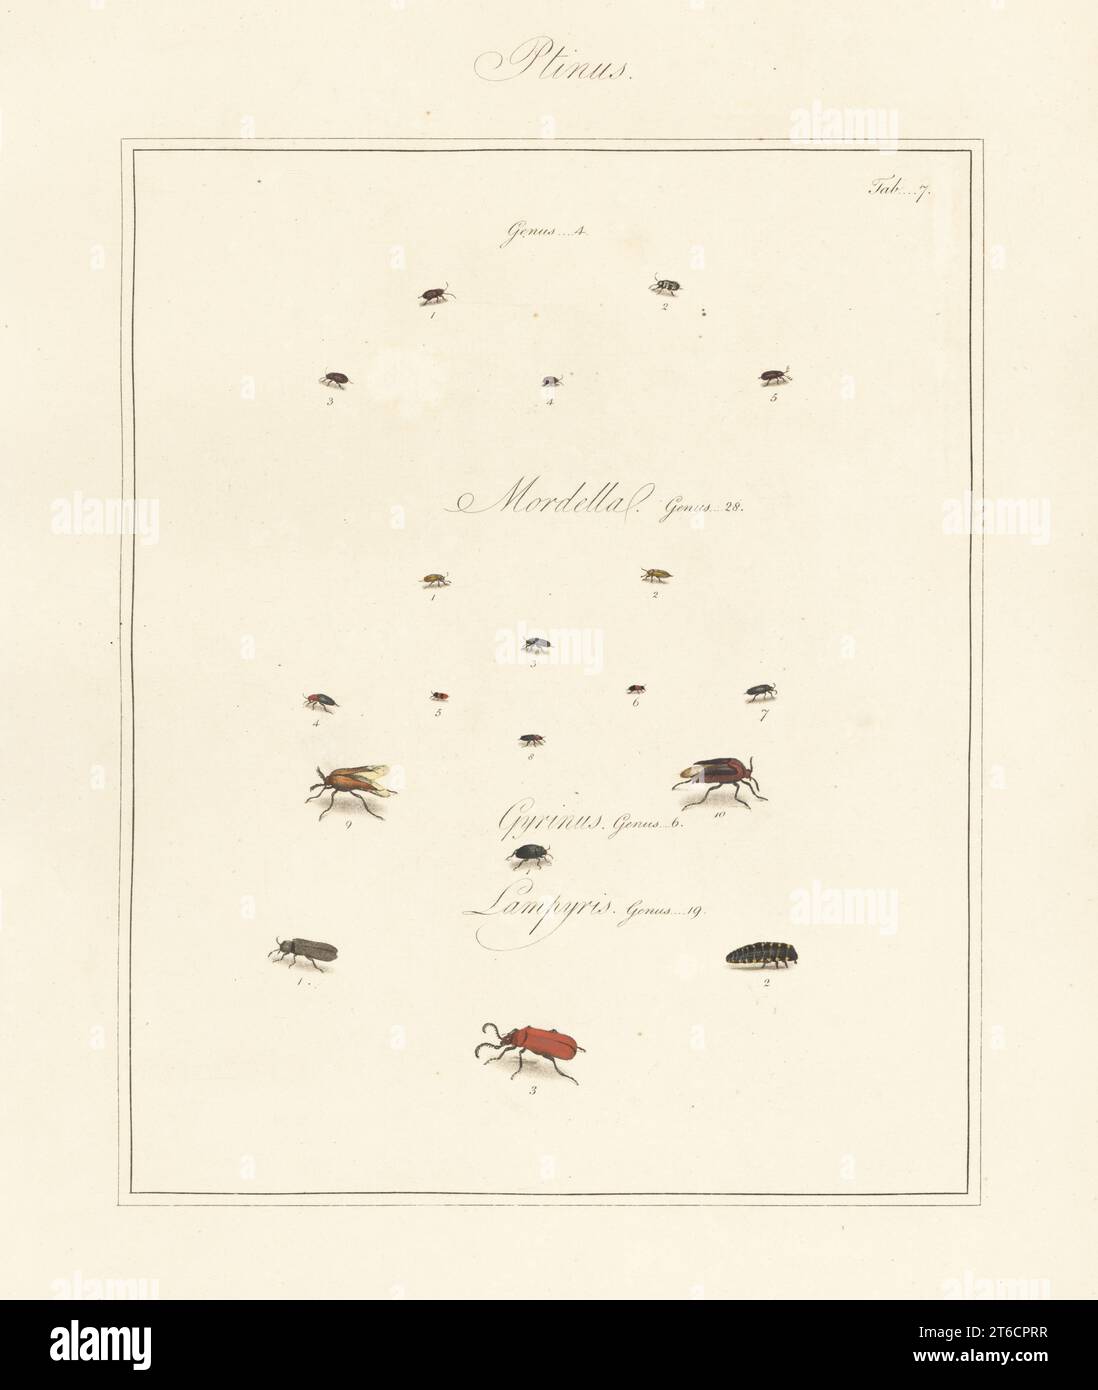 White-marked spider beetle, Ptinus fur 13,4, P. imperialis 2, P. pectinicornis 5, tumbling flower beetle, Mordella aculeata 3, Mordellochroa abdominalis 4, frontalis 7, paradoxa 9,10, whirligig beetle, Gyrinus natator 1, glow worm, Lampyris noctiluca 1,2, cardinal beetle, Pyrochroa species 3. Handcoloured copperplate engraving from Thomas Martyns The English Entomologist, Exhibiting all the Coleopterous Insects found in England, Academy for Illustrating and Painting Natural History, London, 1792. Stock Photo